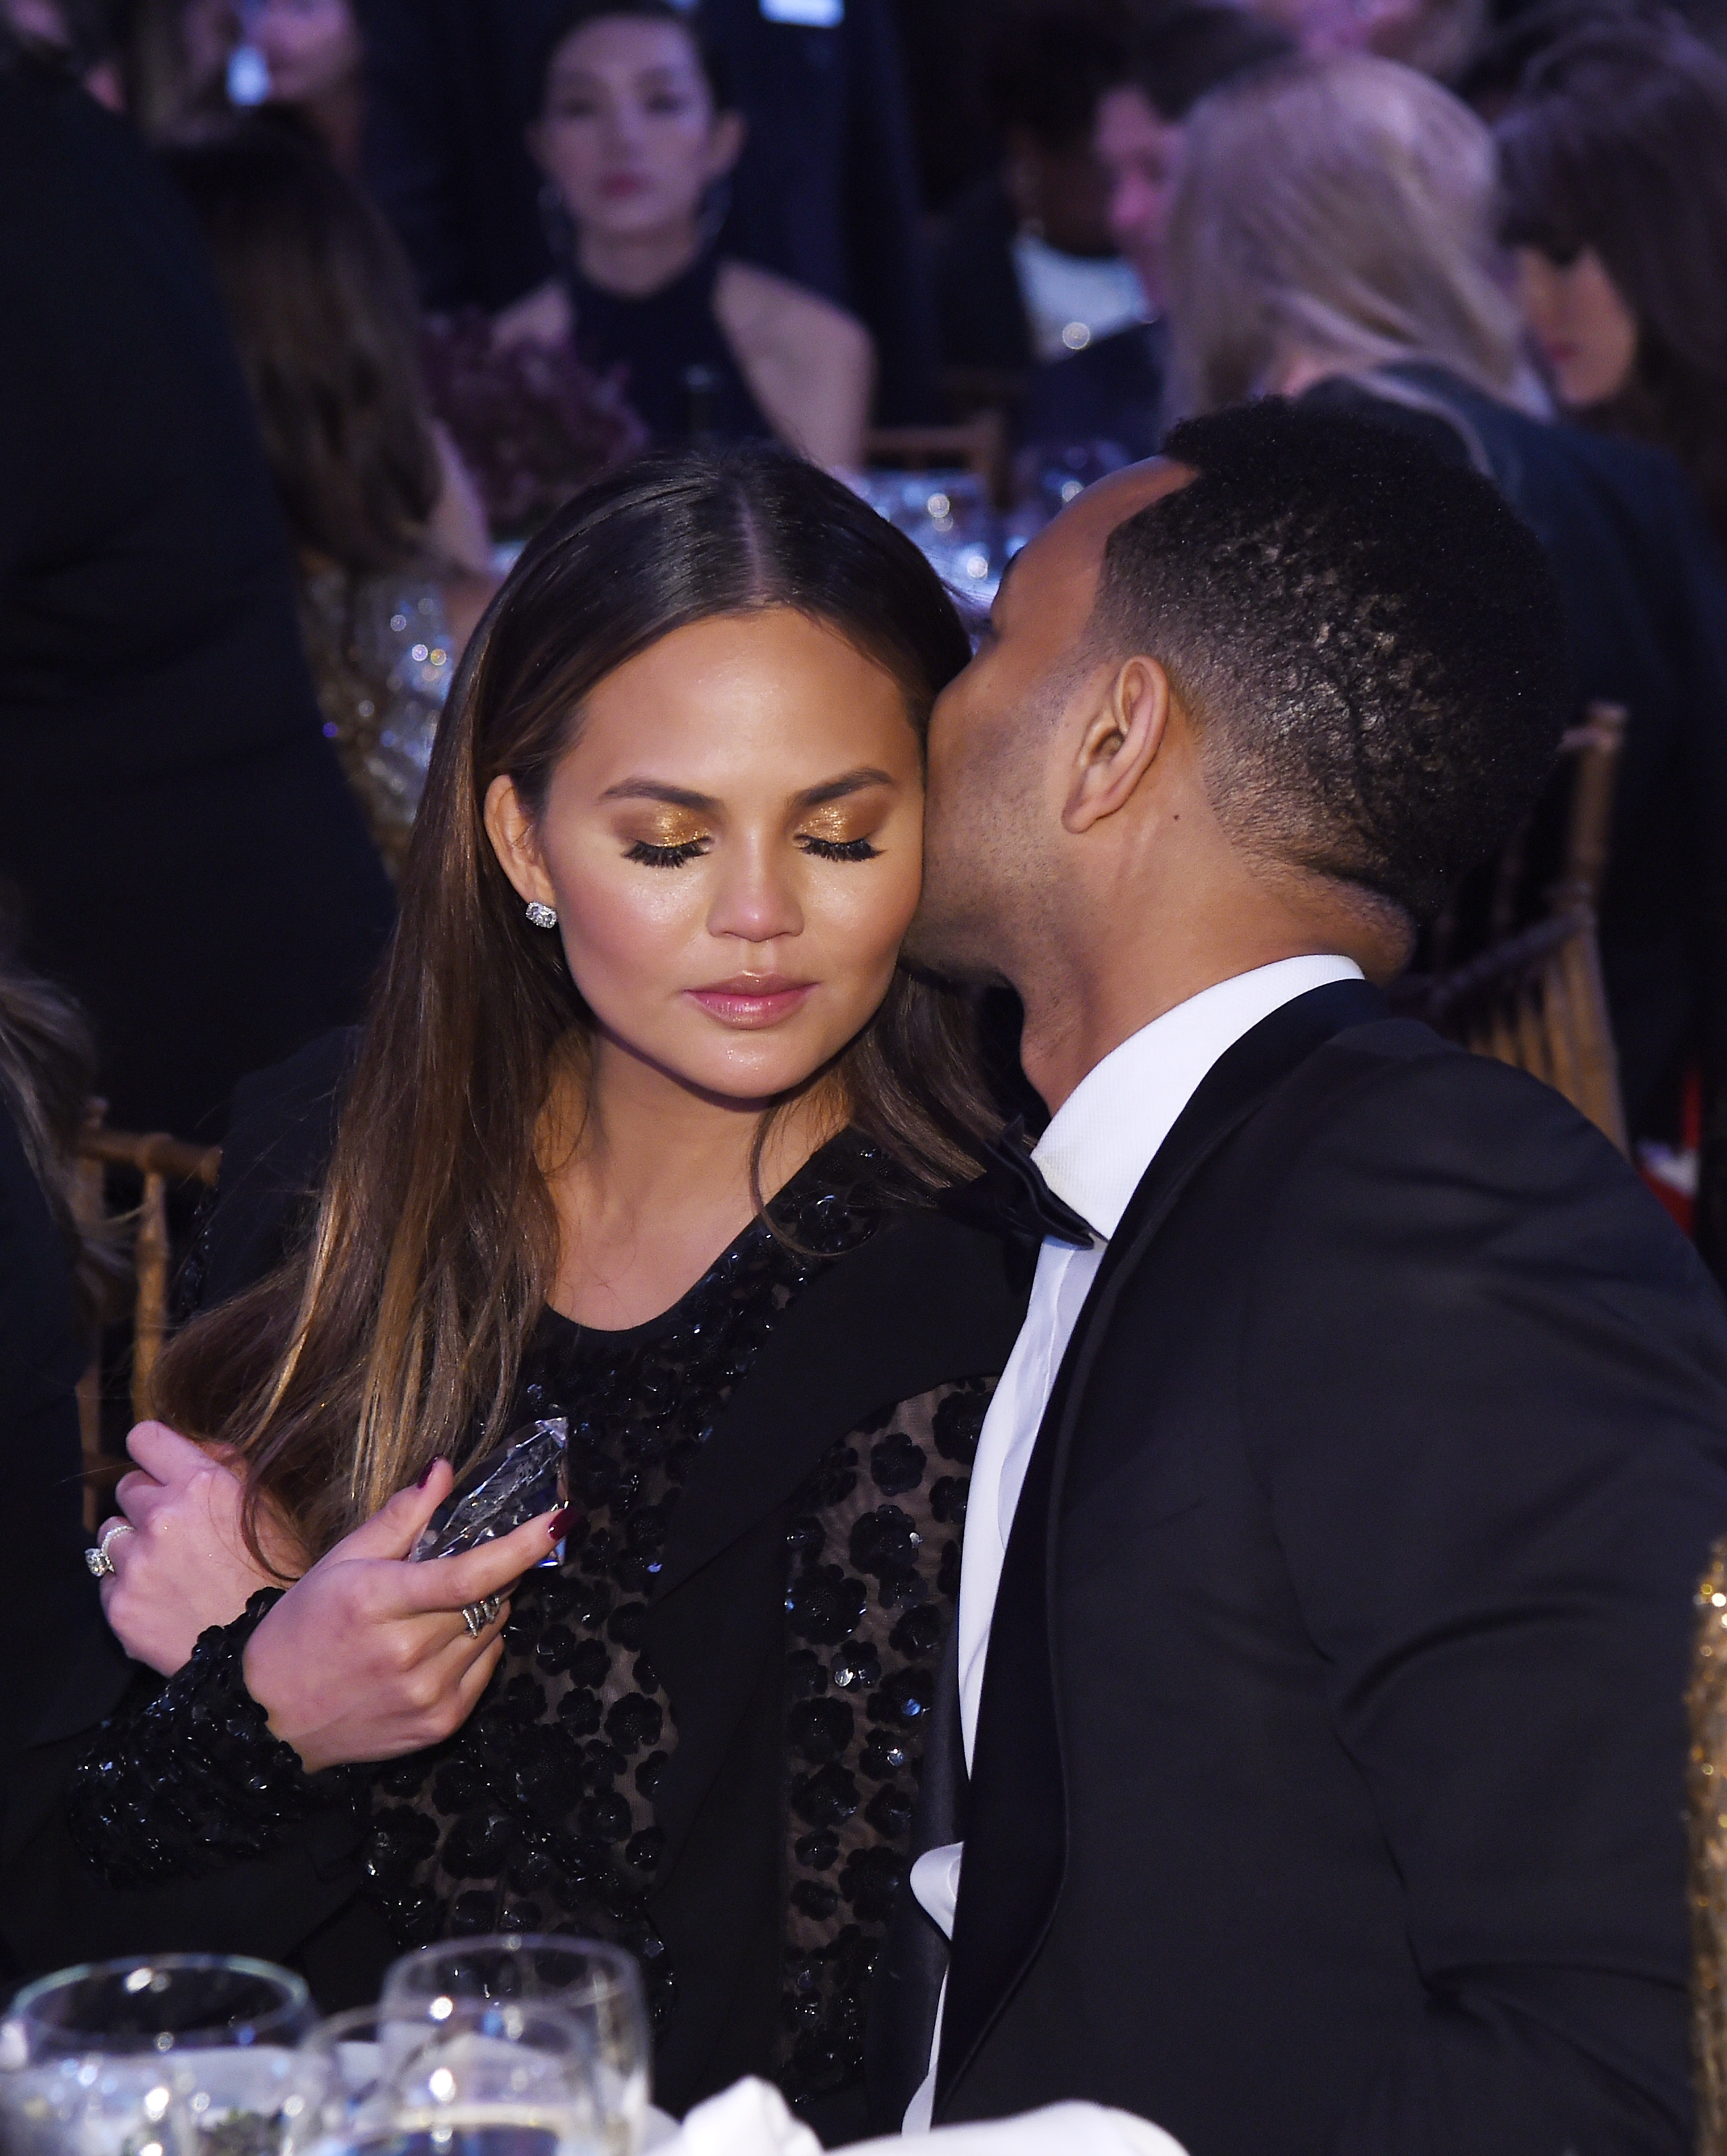 Chrissy Teigen and John Legend at the God's Love We Deliver Golden Heart Awards in New York City, 2016 | Source: Getty Images